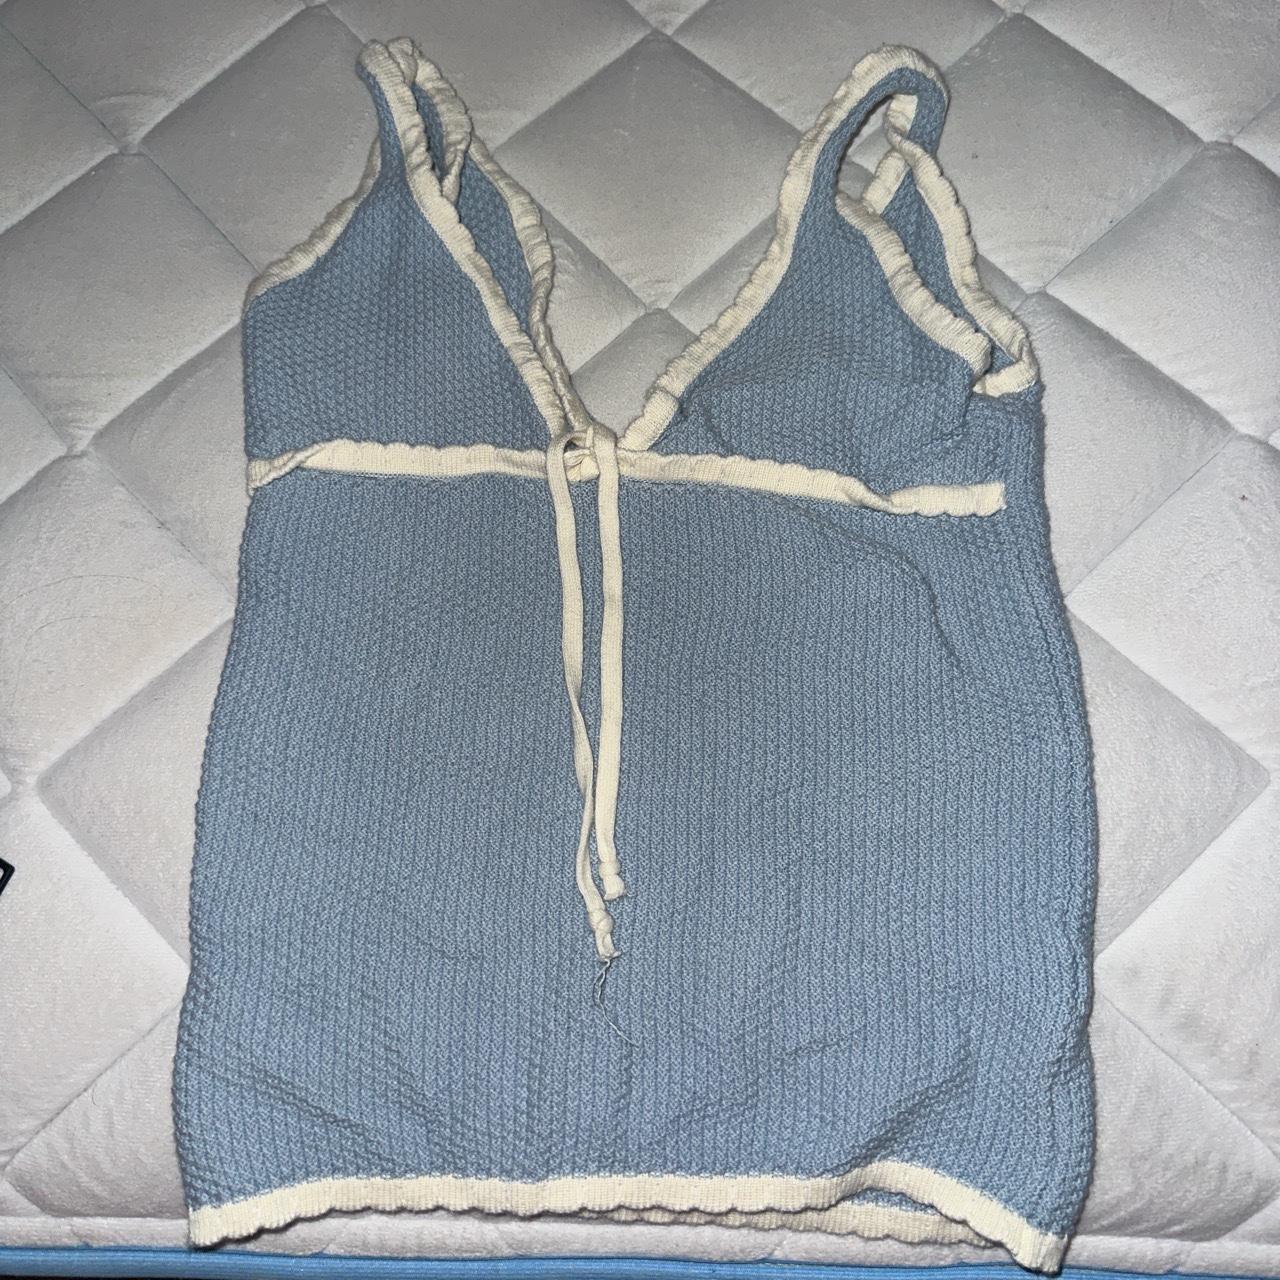 Djerf Avenue Women's Blue and White Vest (3)